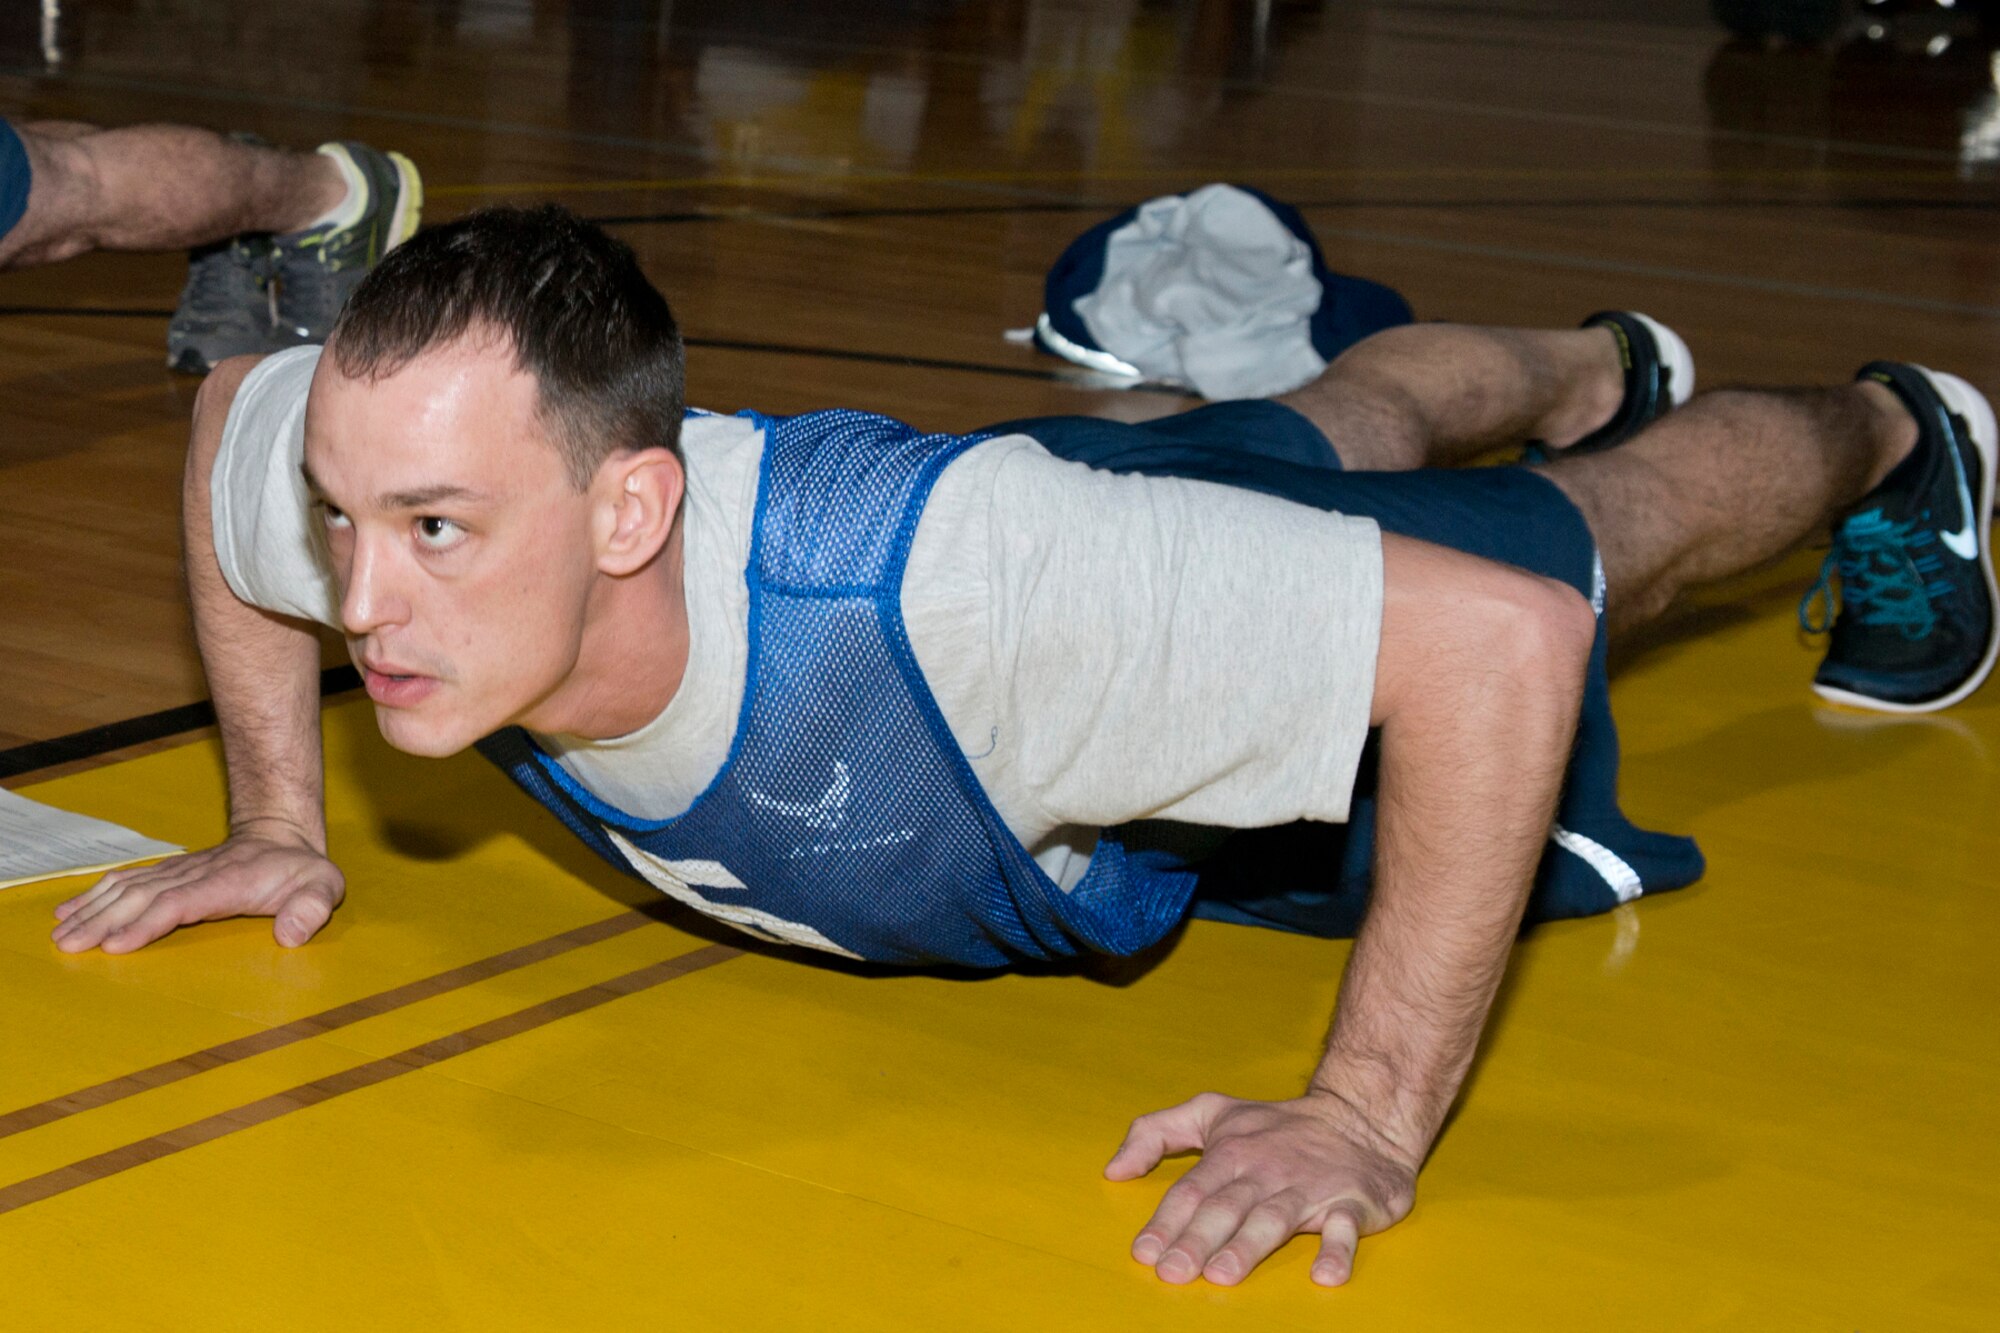 U.S. Air Force Reserve Staff Sgt. Chris Wilder, a propulsion systems journeyman assigned to the 913th Maintenance Squadron, focuses on knocking out push-ups during his physical fitness assessment test at Little Rock Air Force Base, Ark., Jan. 9, 2016. The Air Force uses and overall composite fitness score and minimum scores per component based on aerobic fitness (1.5-mile timed run), body composition (abdominal circumference measurements) and muscular fitness components (push-ups and sit-ups) to determine overall fitness. (U.S. Air Force photo by Master Sgt. Jeff Walston/Released)